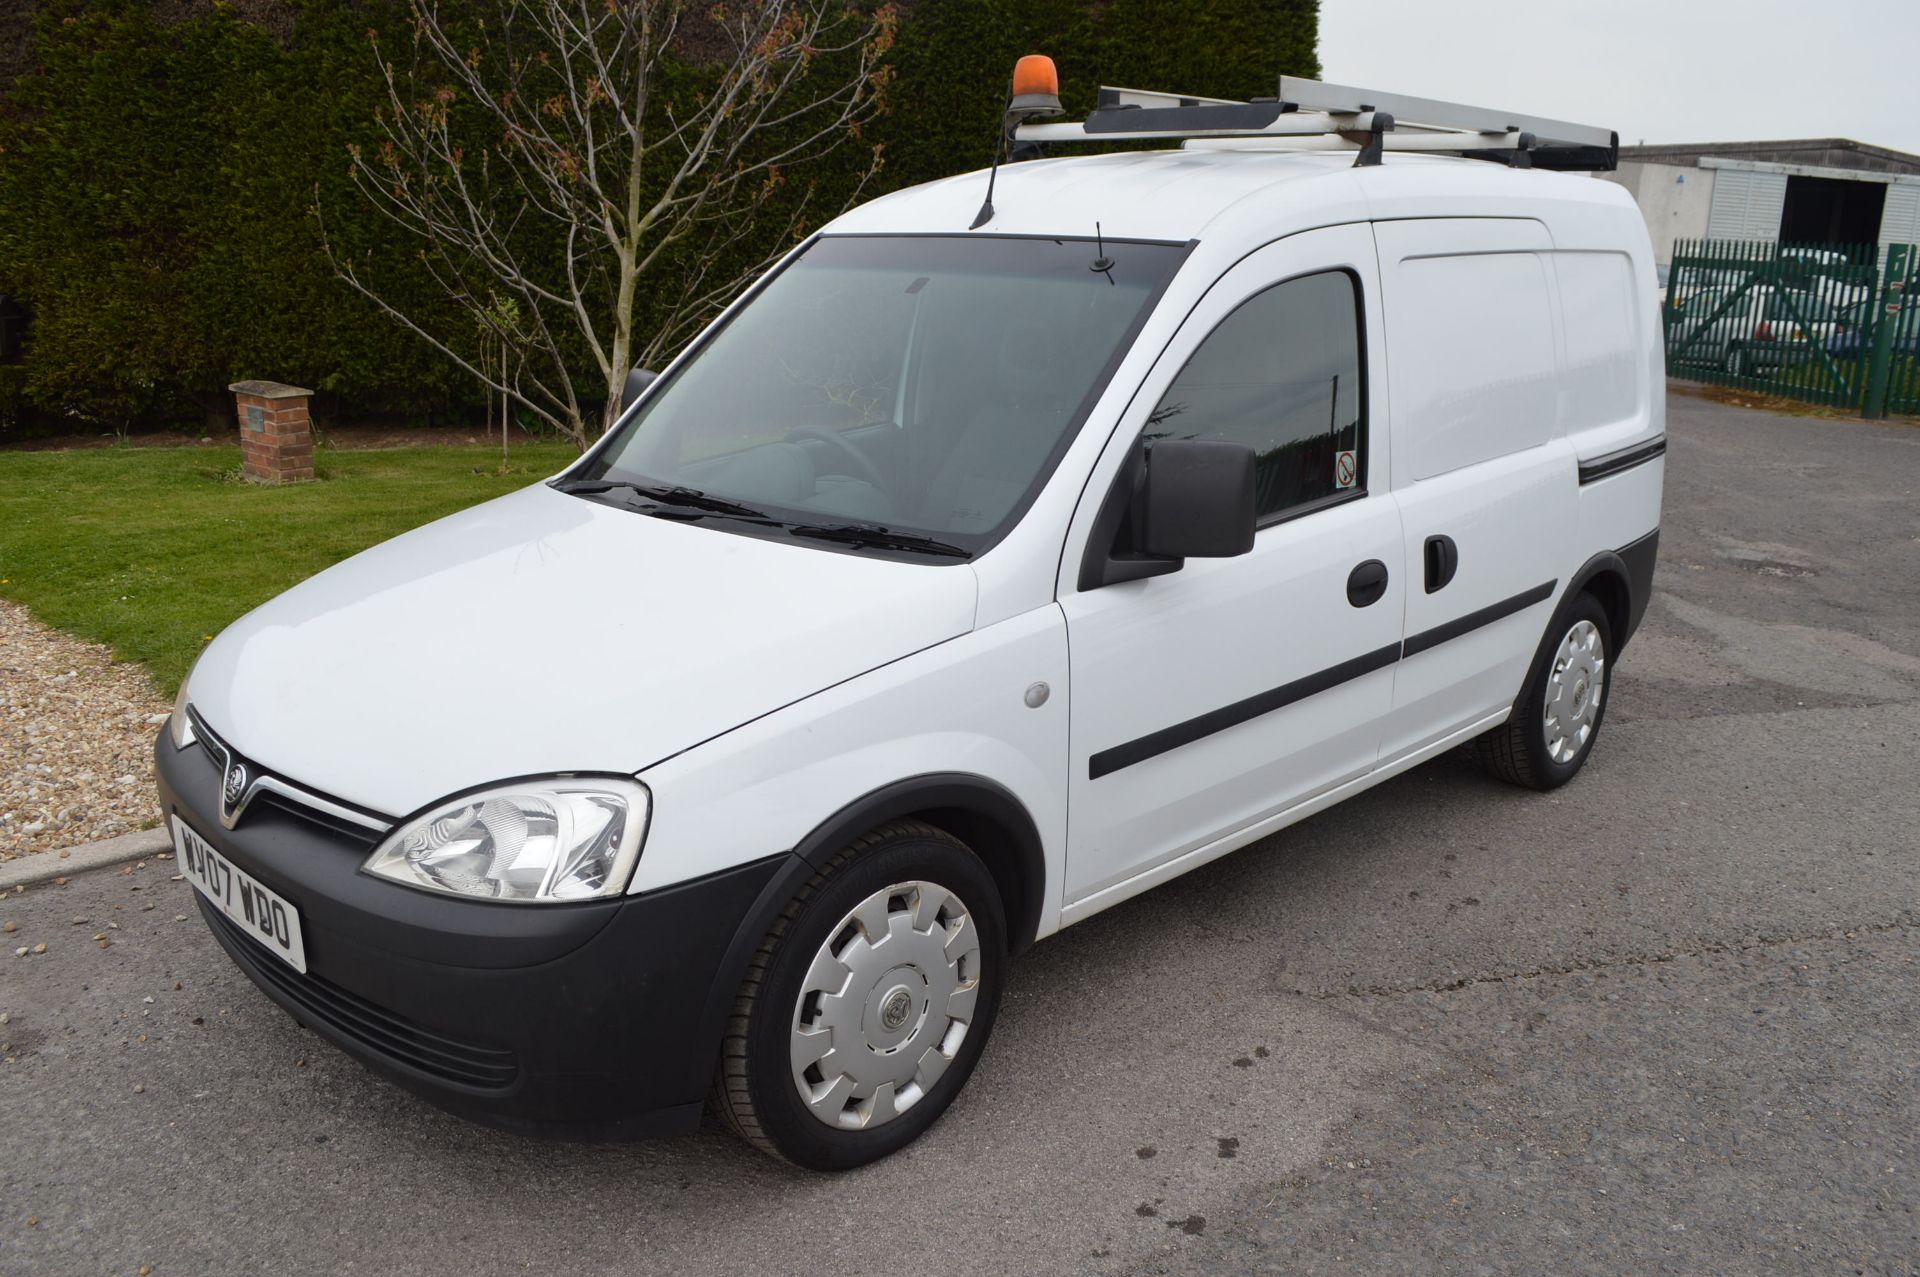 KB - 2007/07 REG VAUXHALL COMBO 2000 CDTI, SHOWING 1 OWNER   DATE OF REGISTRATION: 14TH MARCH 2007 - Image 3 of 17